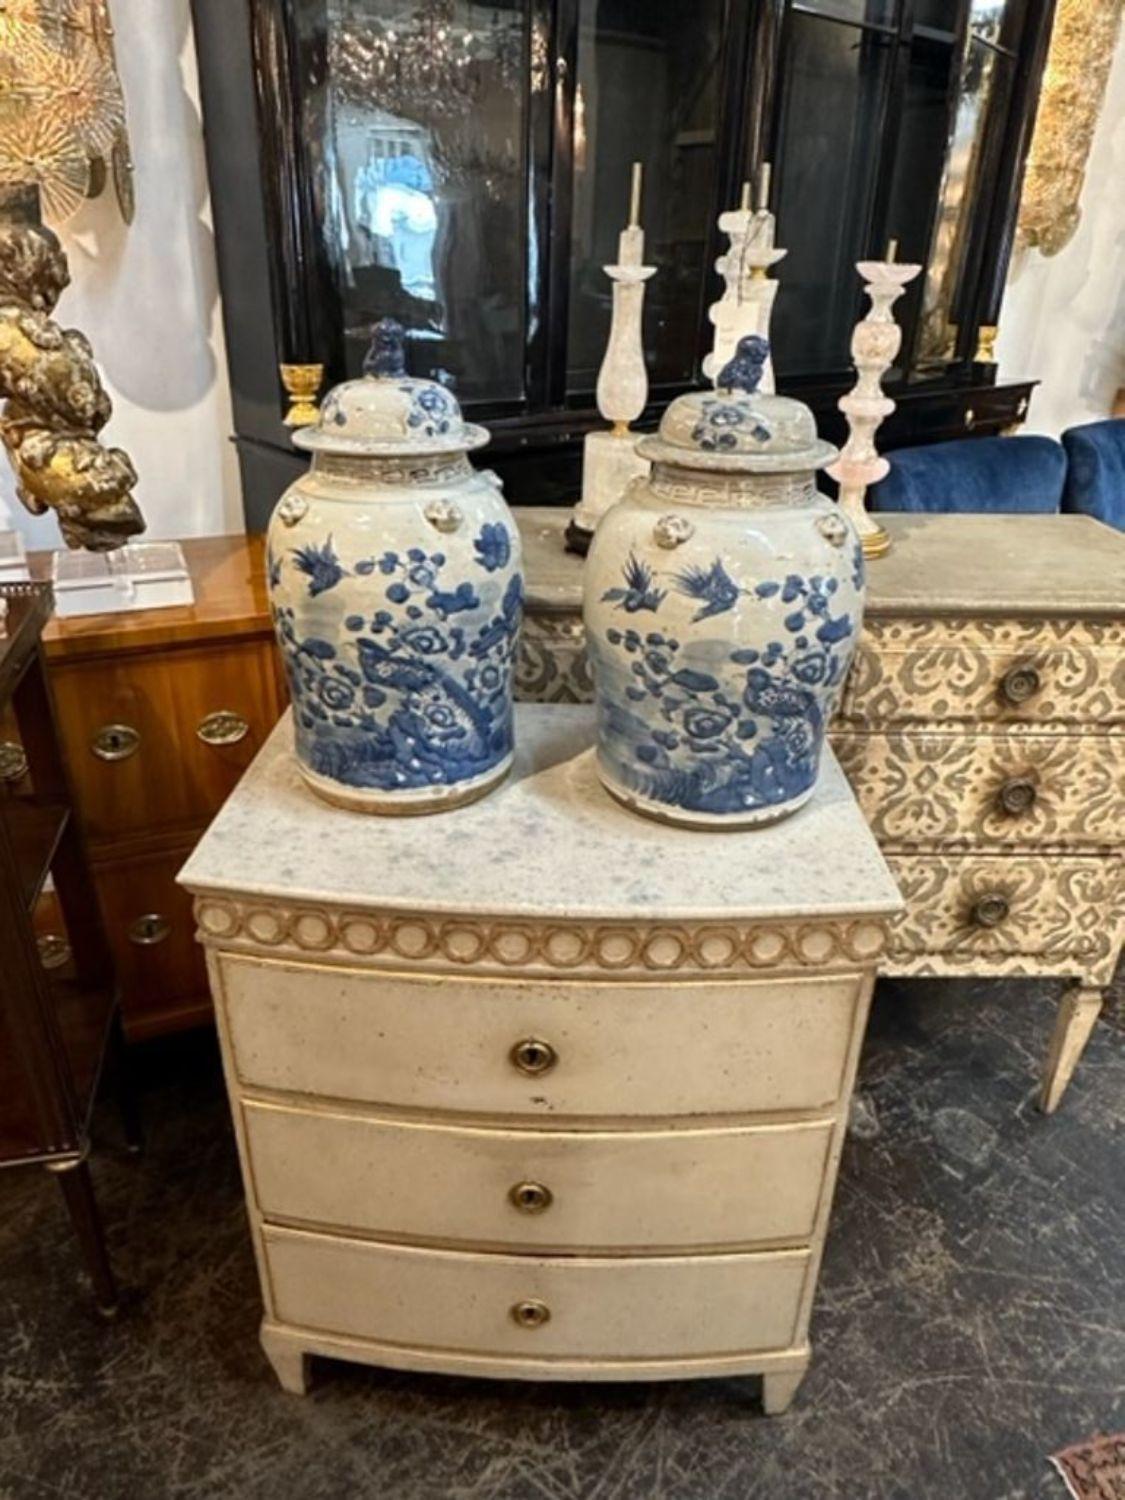 Lovely pair of Chinese blue and white porcelain jars. Pretty images of birds and flowers. A fabulous accessory!